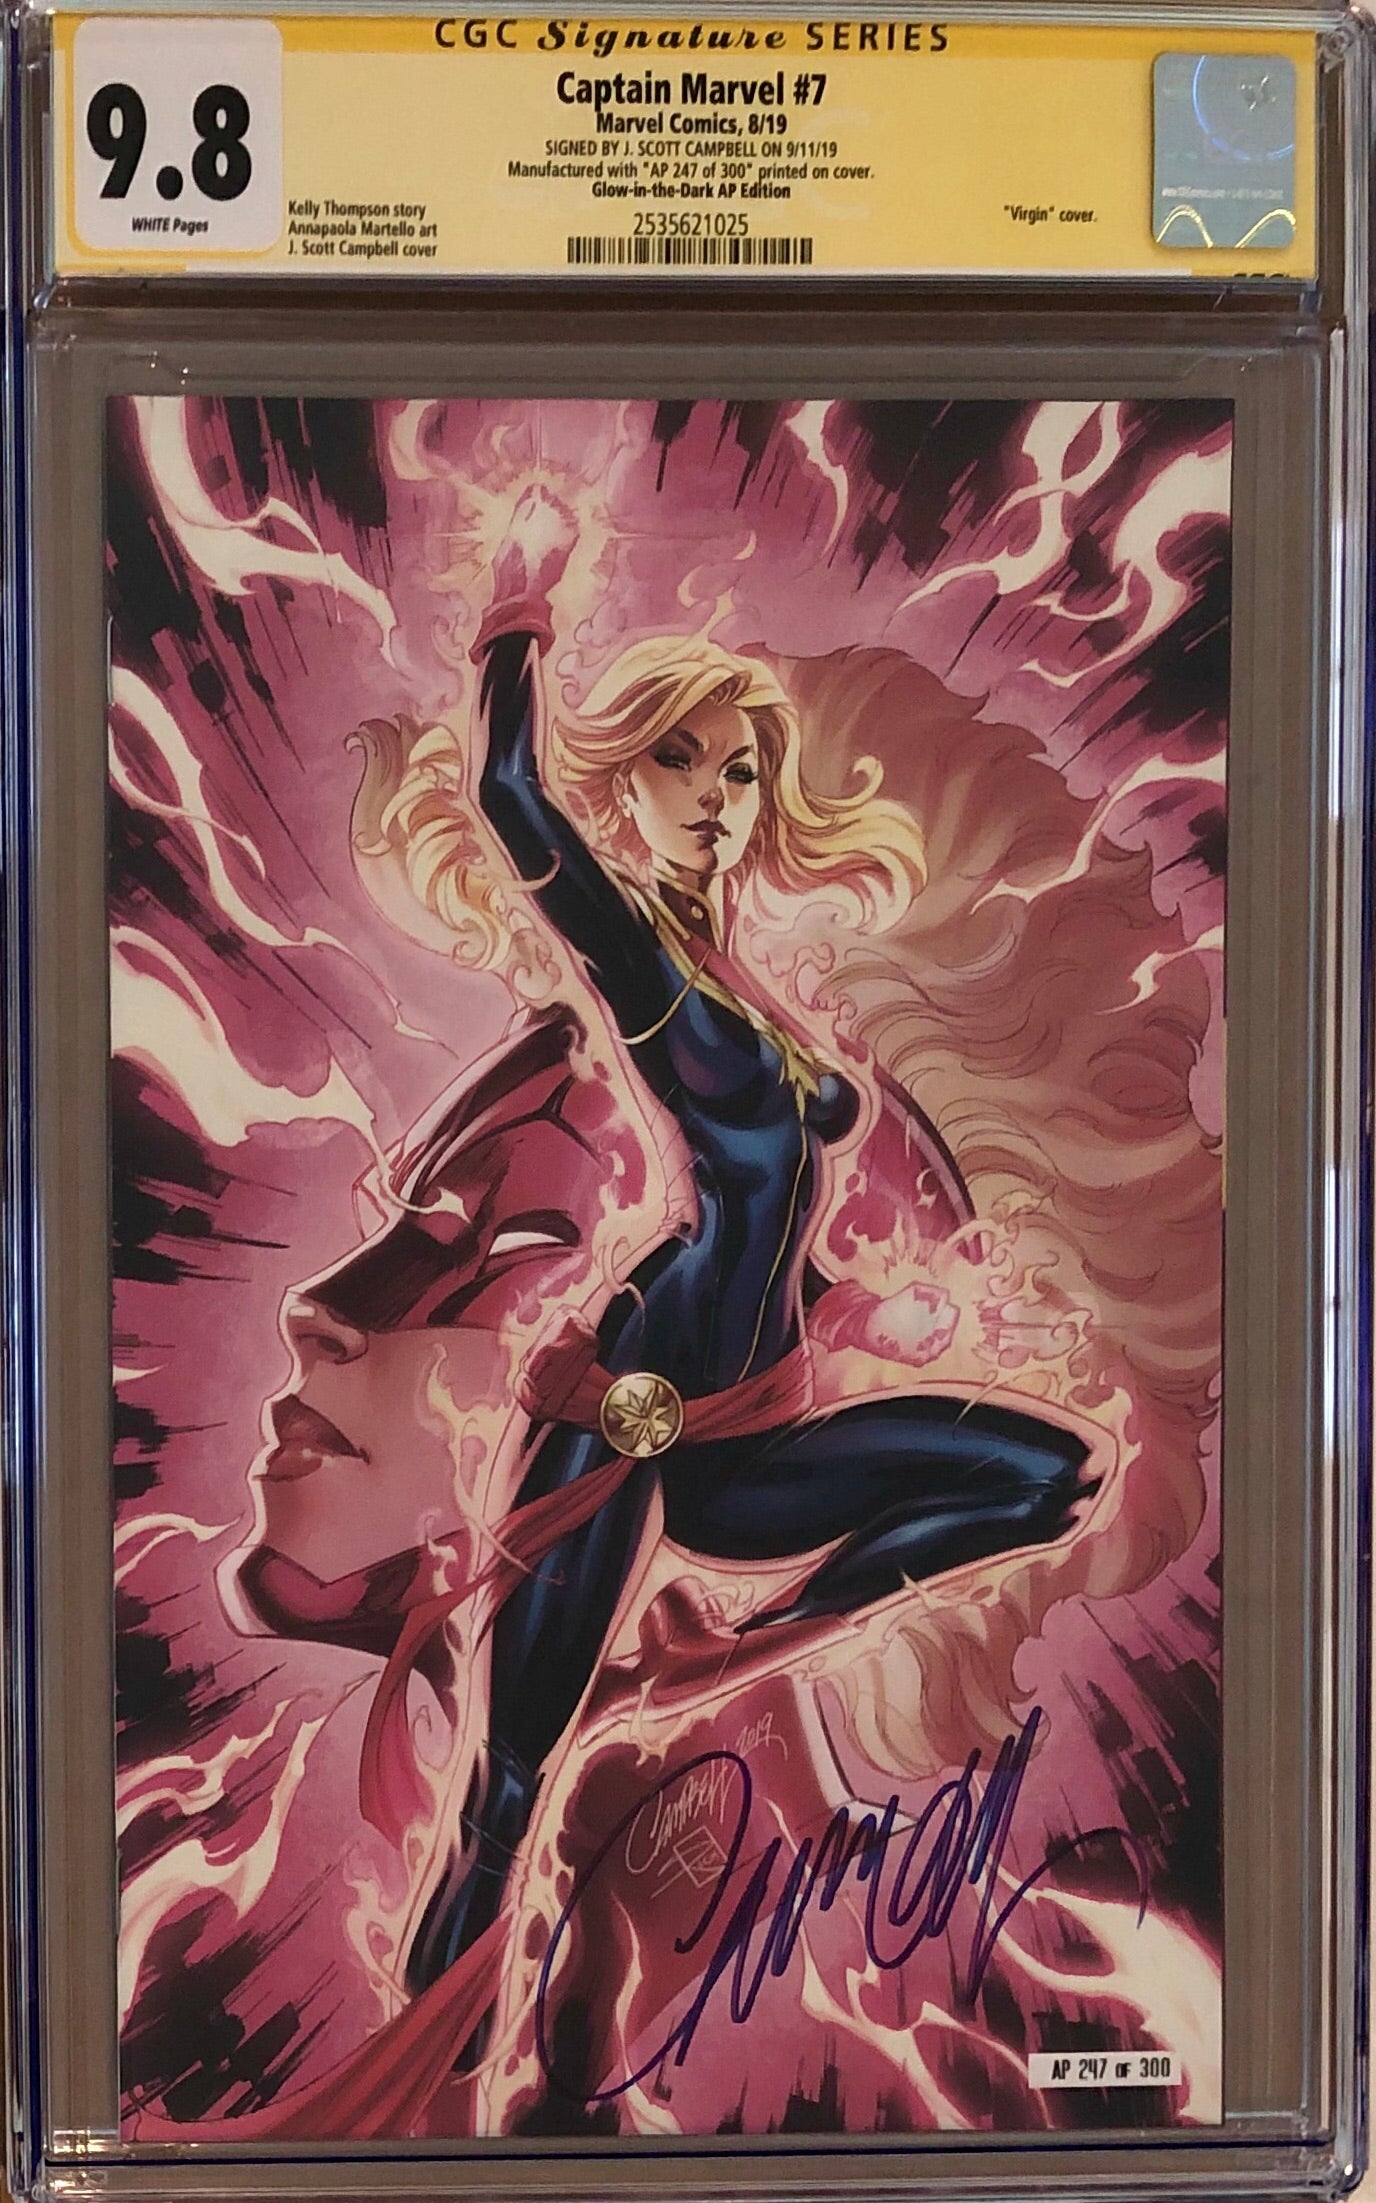 Captain Marvel #7 J. Scott Campbell SDCC Glow in the Dark Artist Proof AP Exclusive CGC 9.8 SS